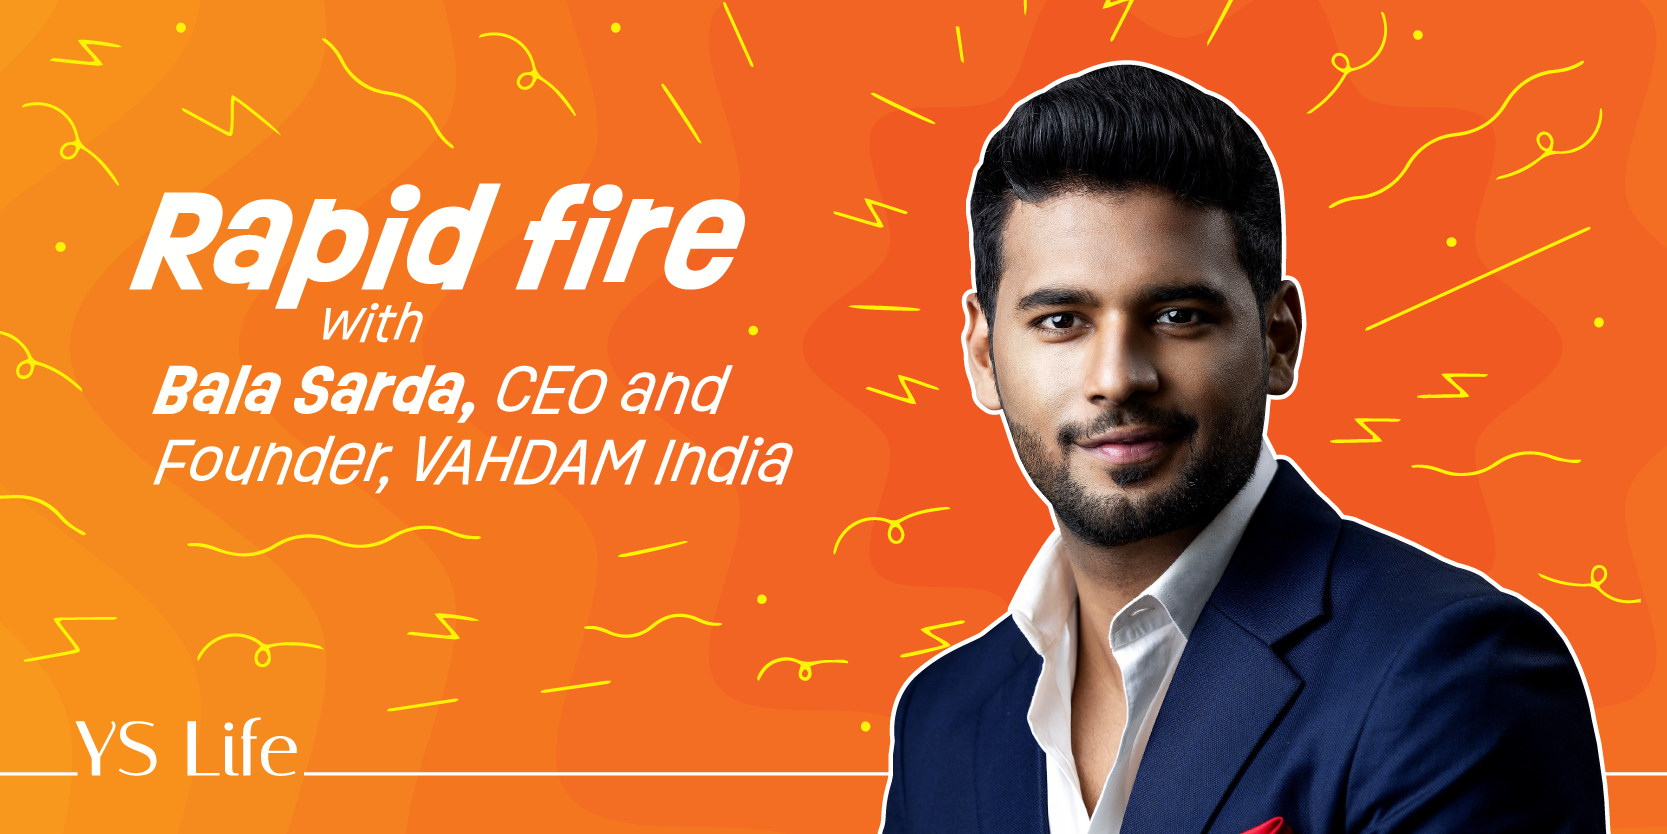 Rapid fire with Bala Sarda, CEO and Founder of VAHDAM India